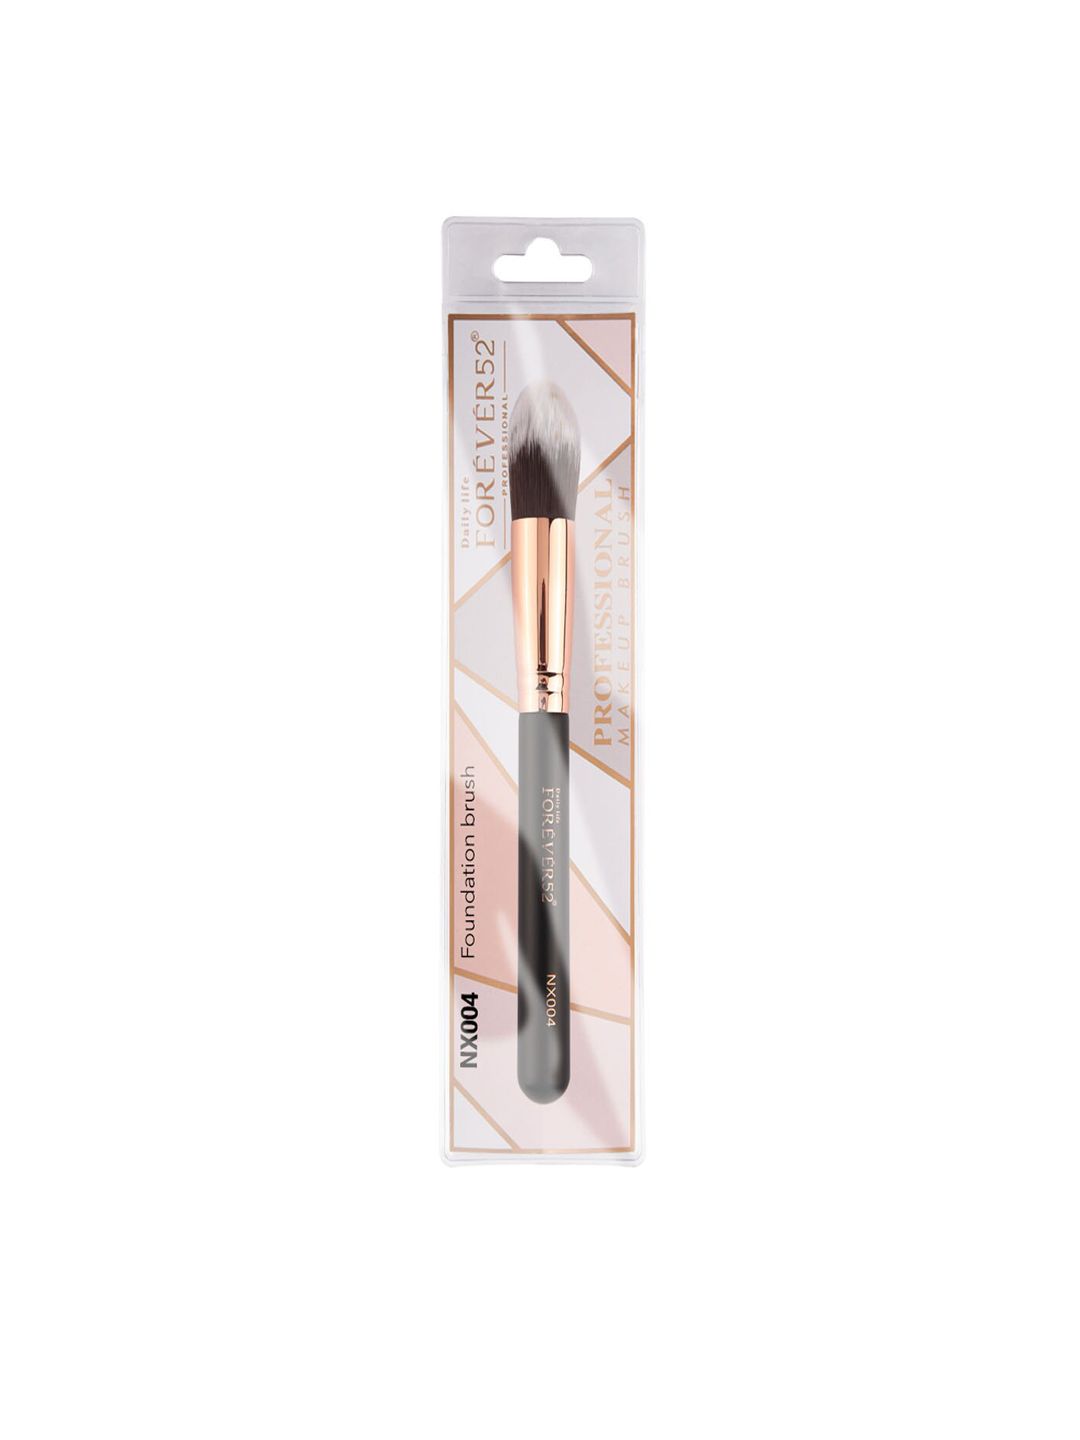 Daily Life Forever52 Foundation brush NX004 Price in India